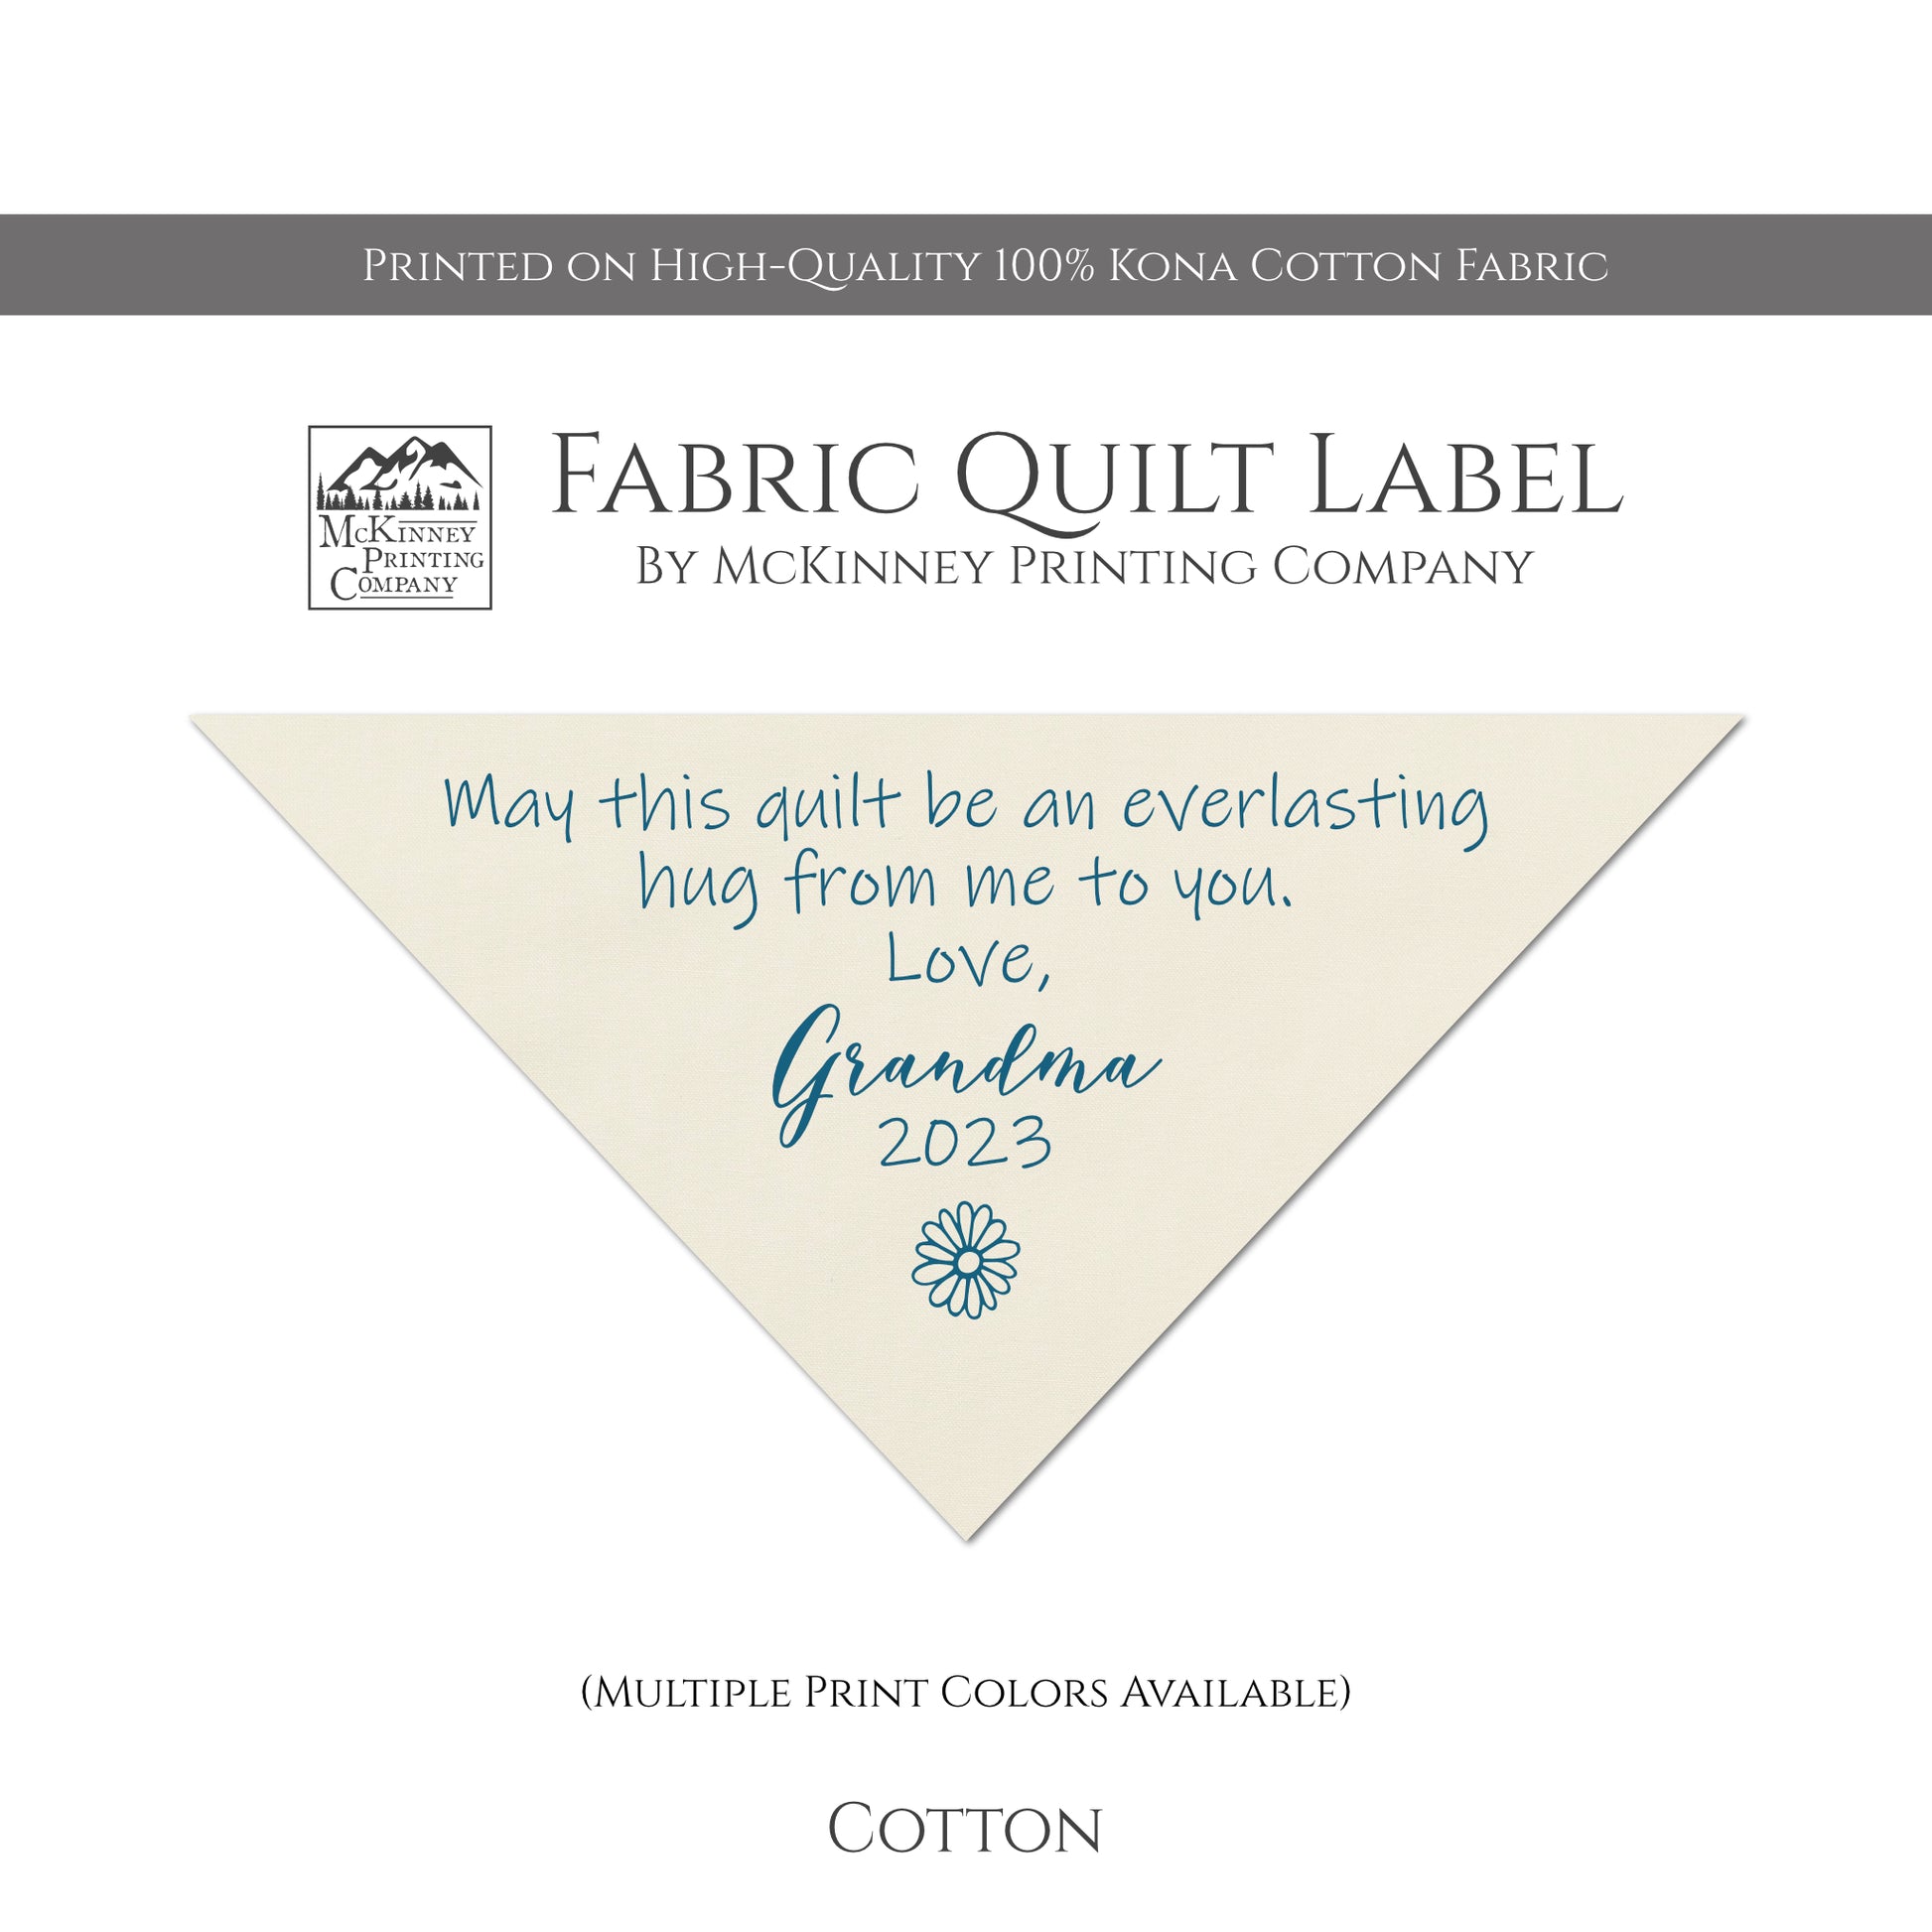 Triangle Quilt Label for Quilts - Cotton